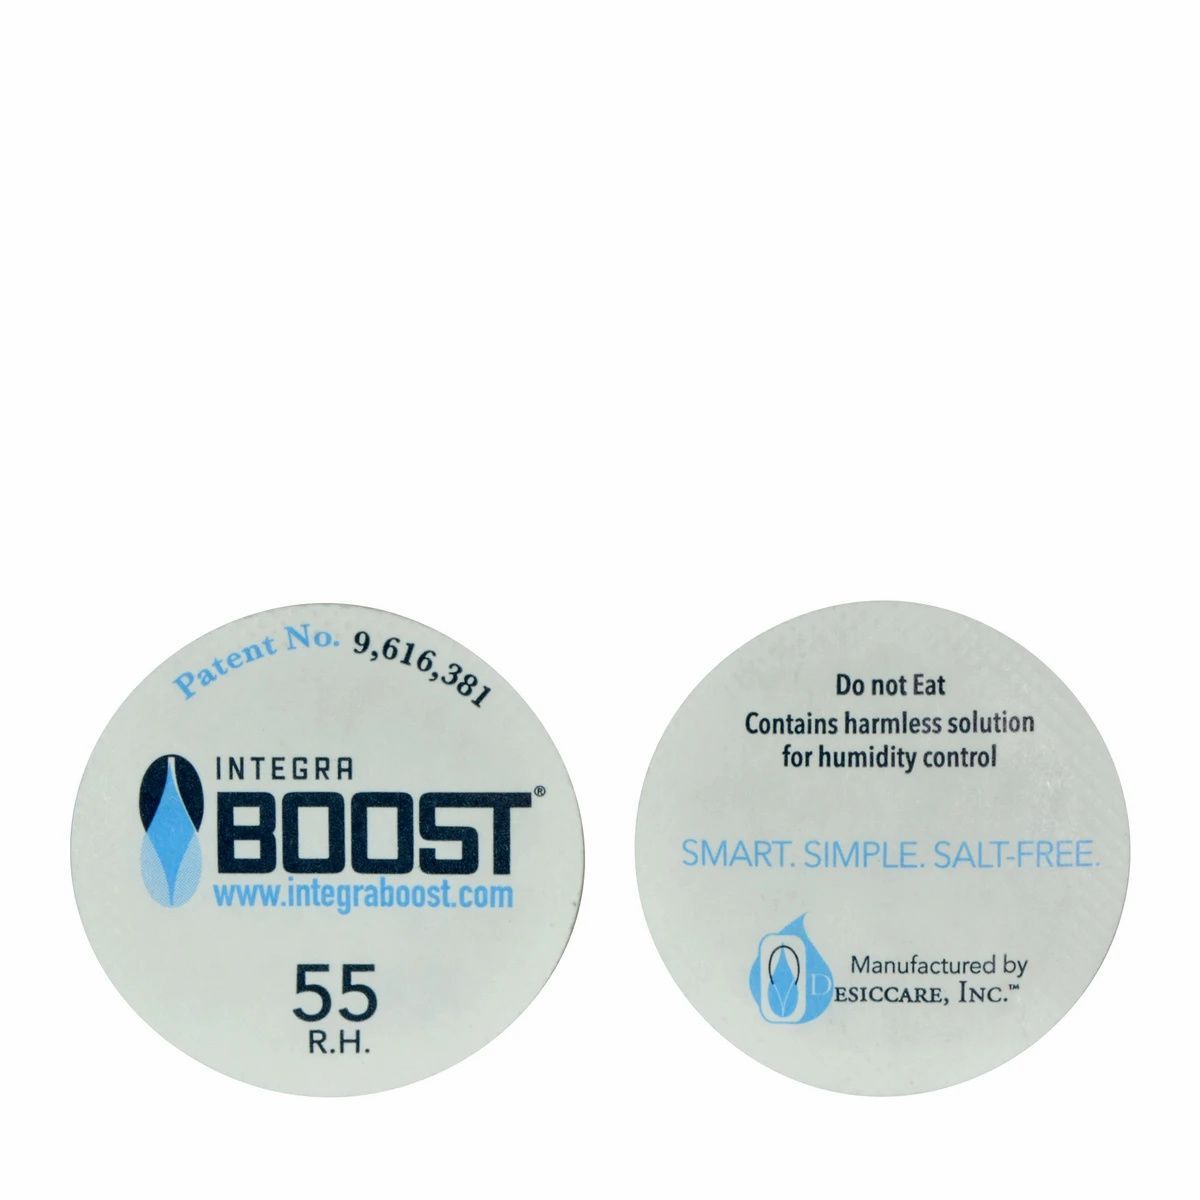 Integra Boost® 45mm Humidity Control Circles re salt-free, spill-proof and FDA-complaint so you can safely and confidently place Integra BOOST® circle packs directly inside a container or jar alongside your herbs or place inside lids to absorb and/or provide excess moisture as needed